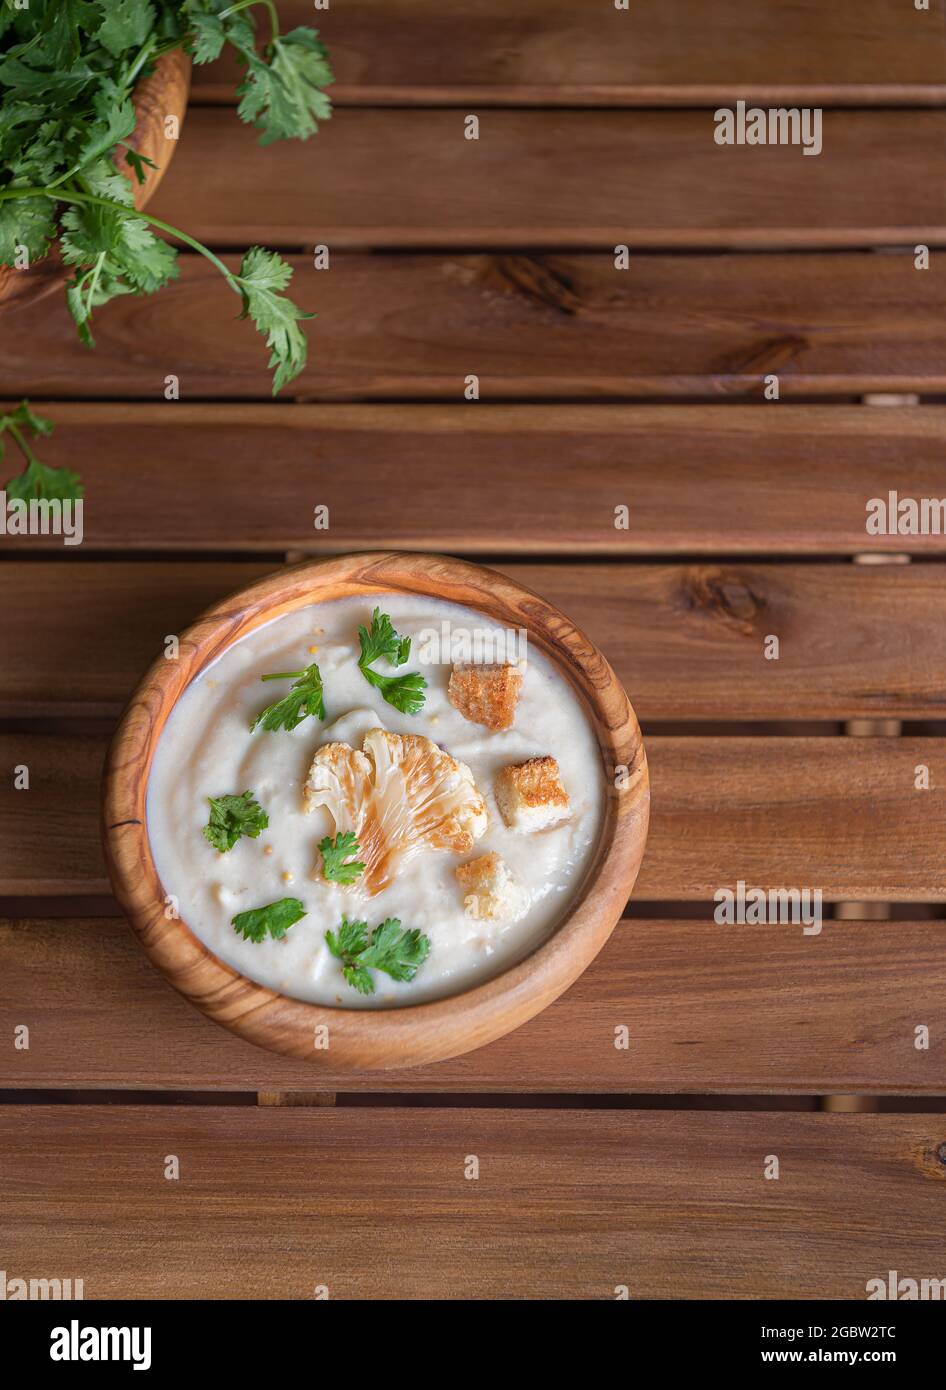 Cream soup with white cauliflower, green herbs and croutons on top in wooden olive bowl on brown wooden table made of planks. Fresh cilantro on side. Stock Photo